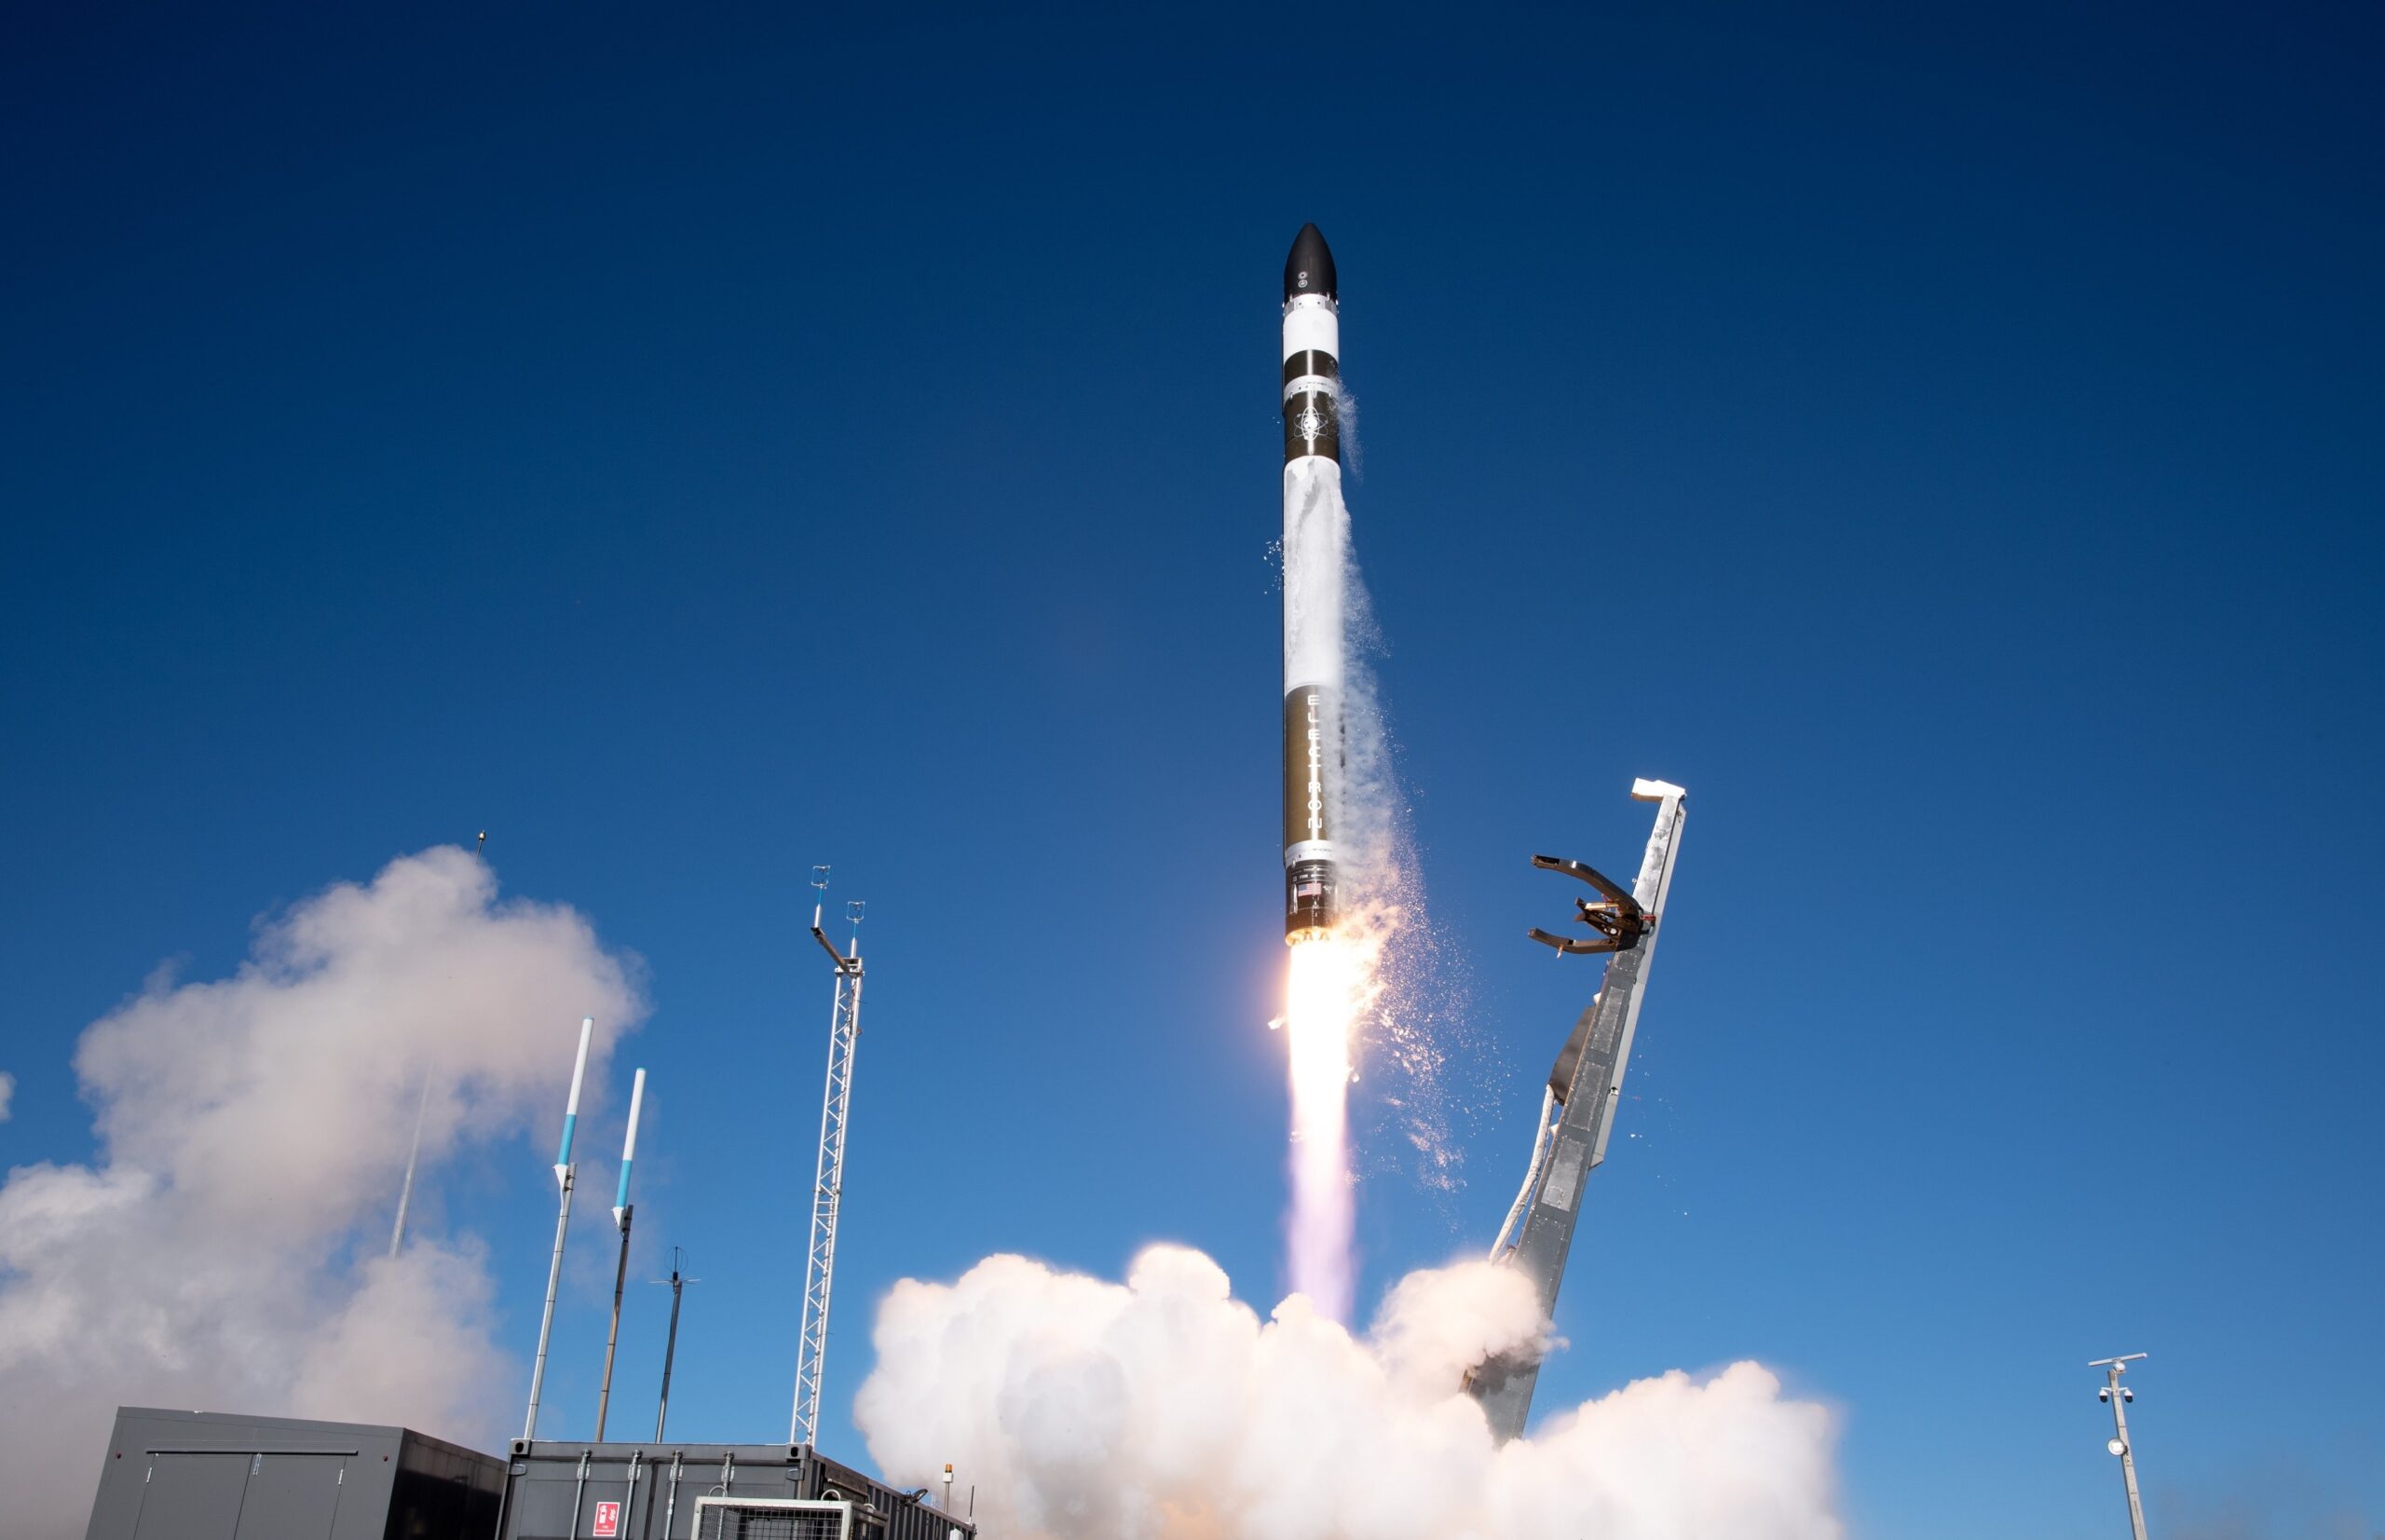 The 20th Electron Rocket Launch by Rocket Lab Ends Up Losing Payload